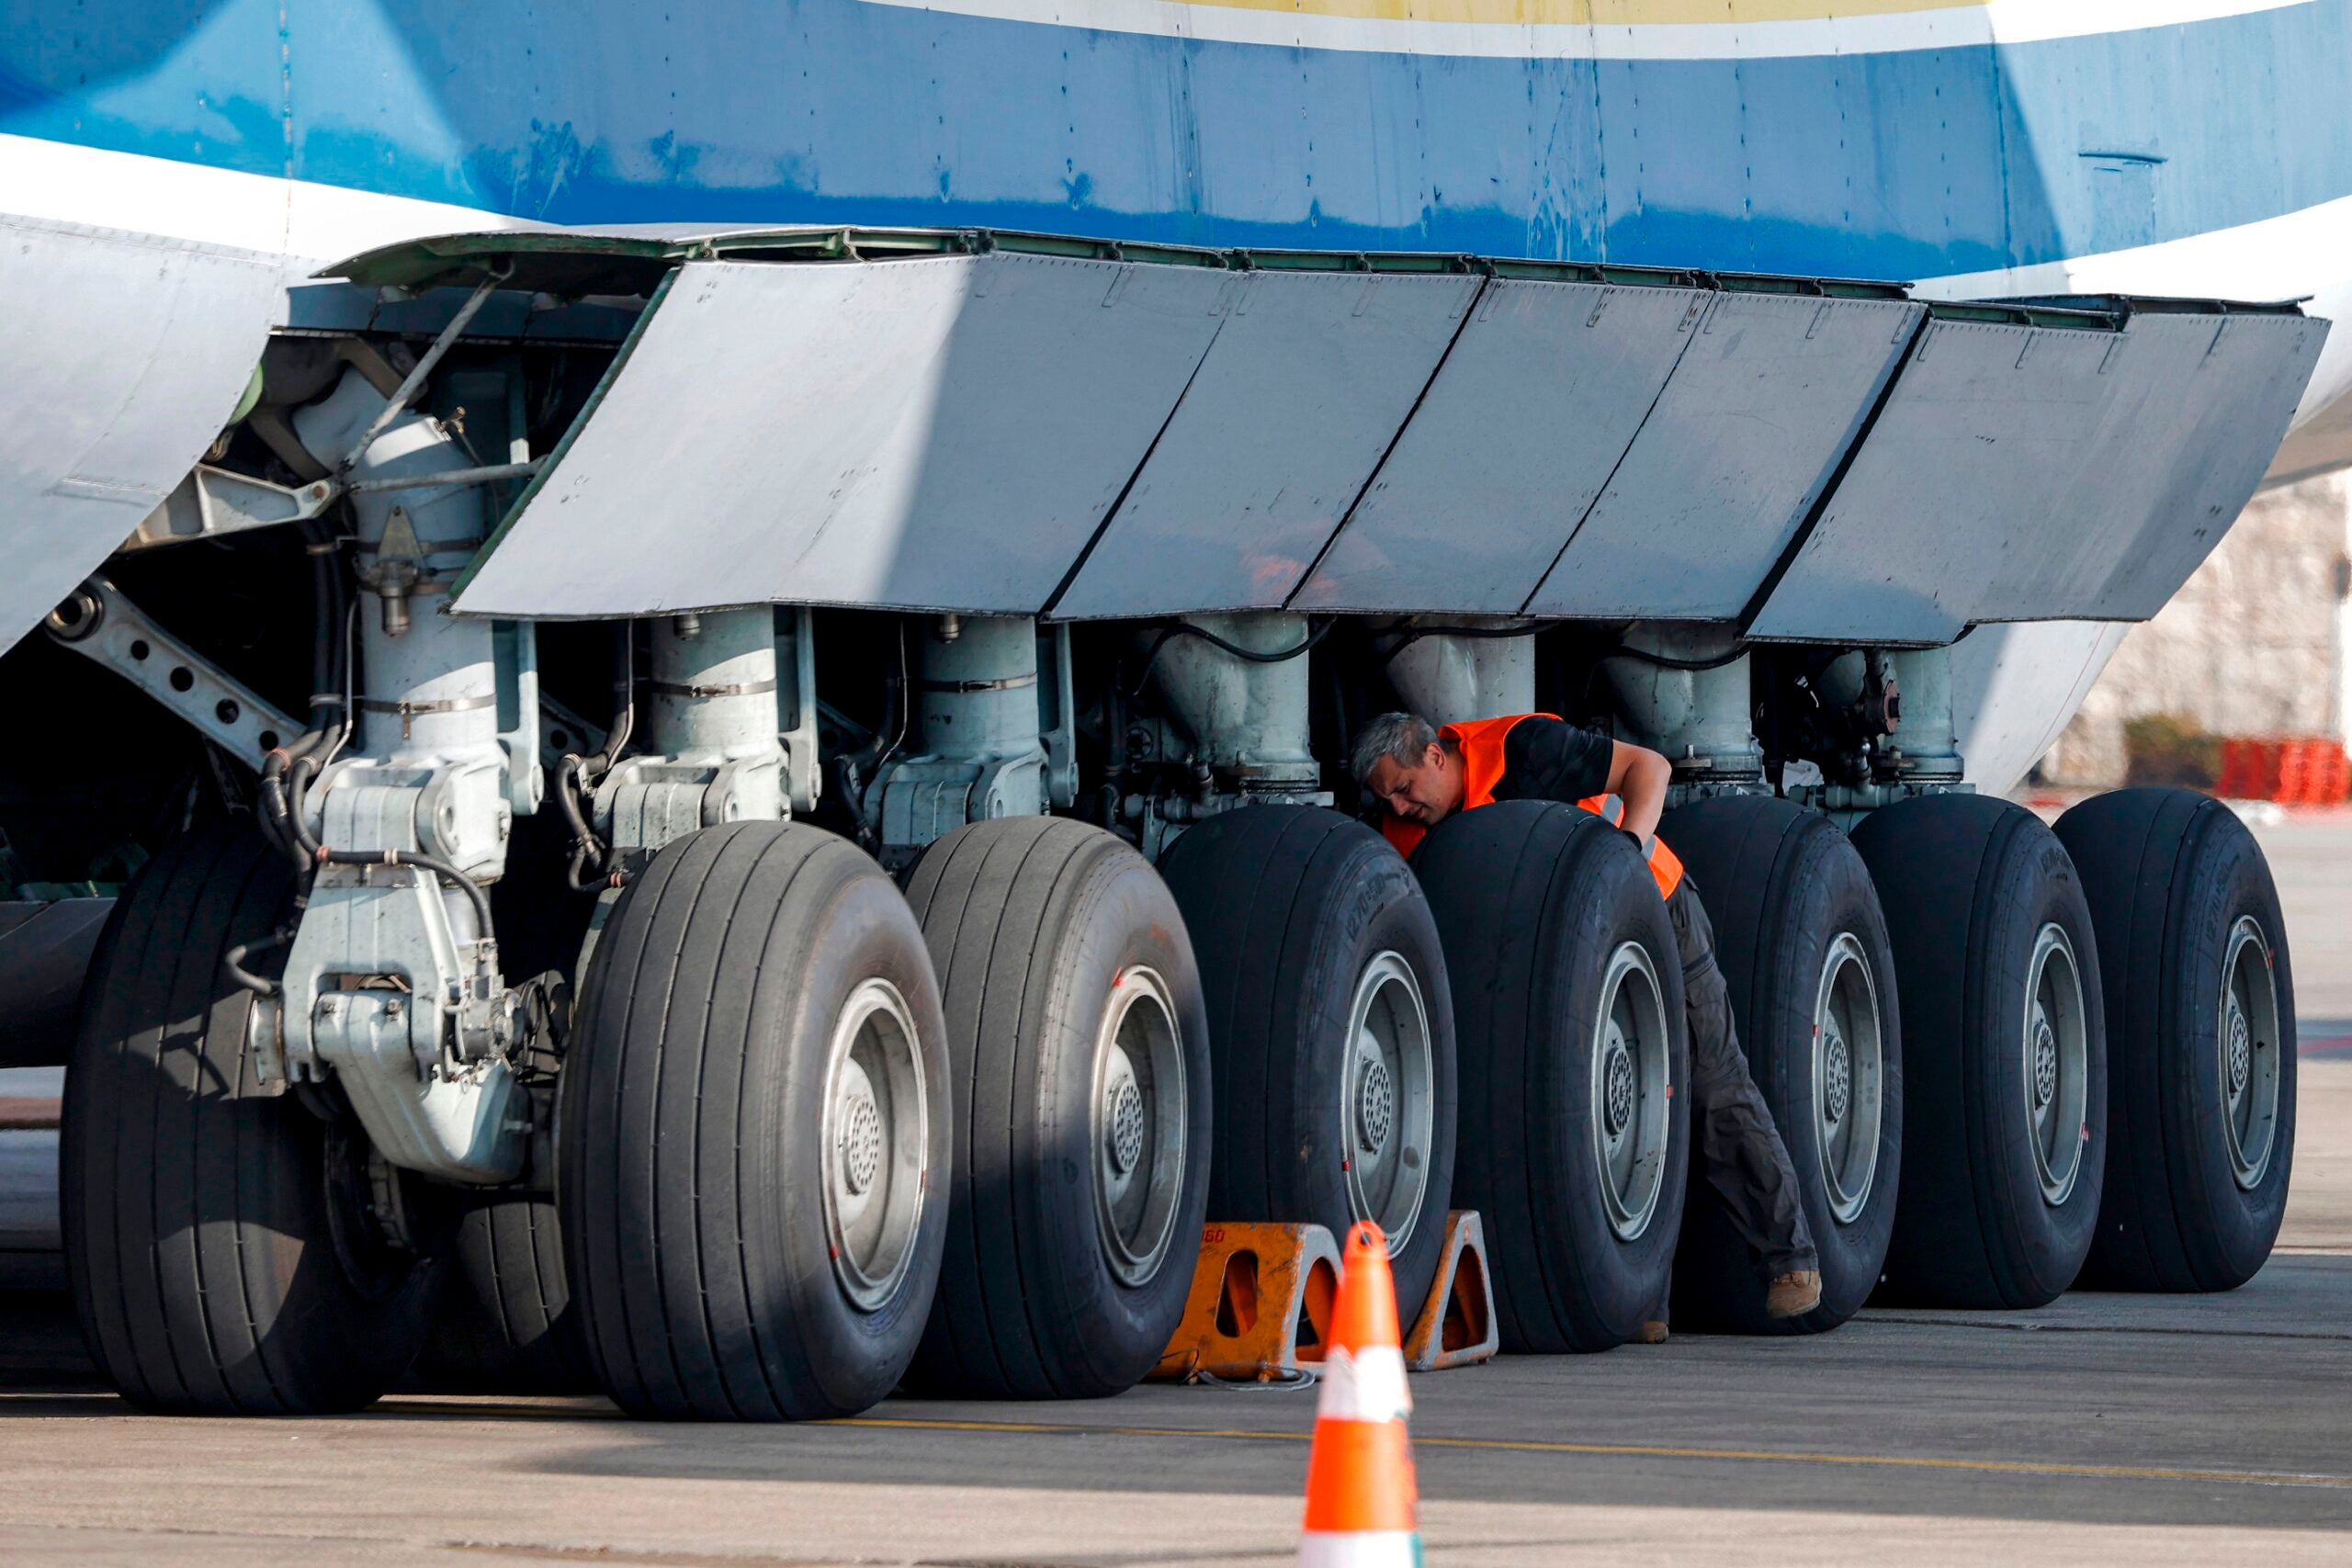 An airport technician checks on the landing gear of the Soviet-built Antonov Airlines Antonov An-225 Mriya strategic airlift cargo aircraft, the world's largest cargo plane, at Israel's Ben Gurion International Airport in Lod, east of Tel Aviv on August 3, 2020. - The aircraft arrived in Israel carrying US Oshkosh military vehicles, which will be fitted to be used Iron Dome systems purchased by the US military, as per an August 2019 agreement. (Photo by JACK GUEZ / AFP) (Photo by JACK GUEZ/AFP via Getty Images)